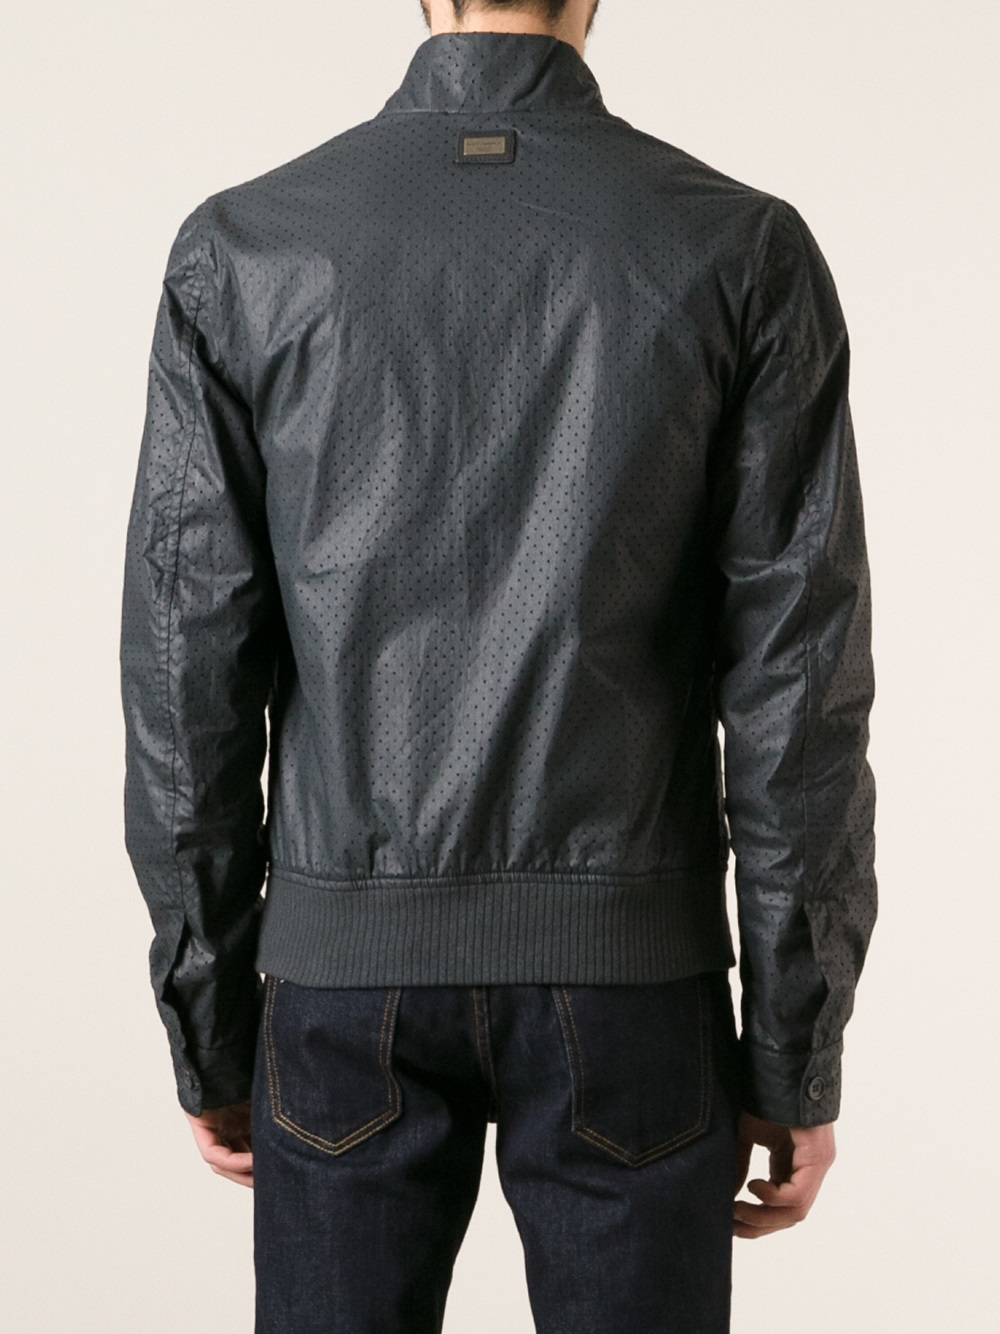 Lyst - Dolce & Gabbana Perforated Bomber Jacket in Black for Men